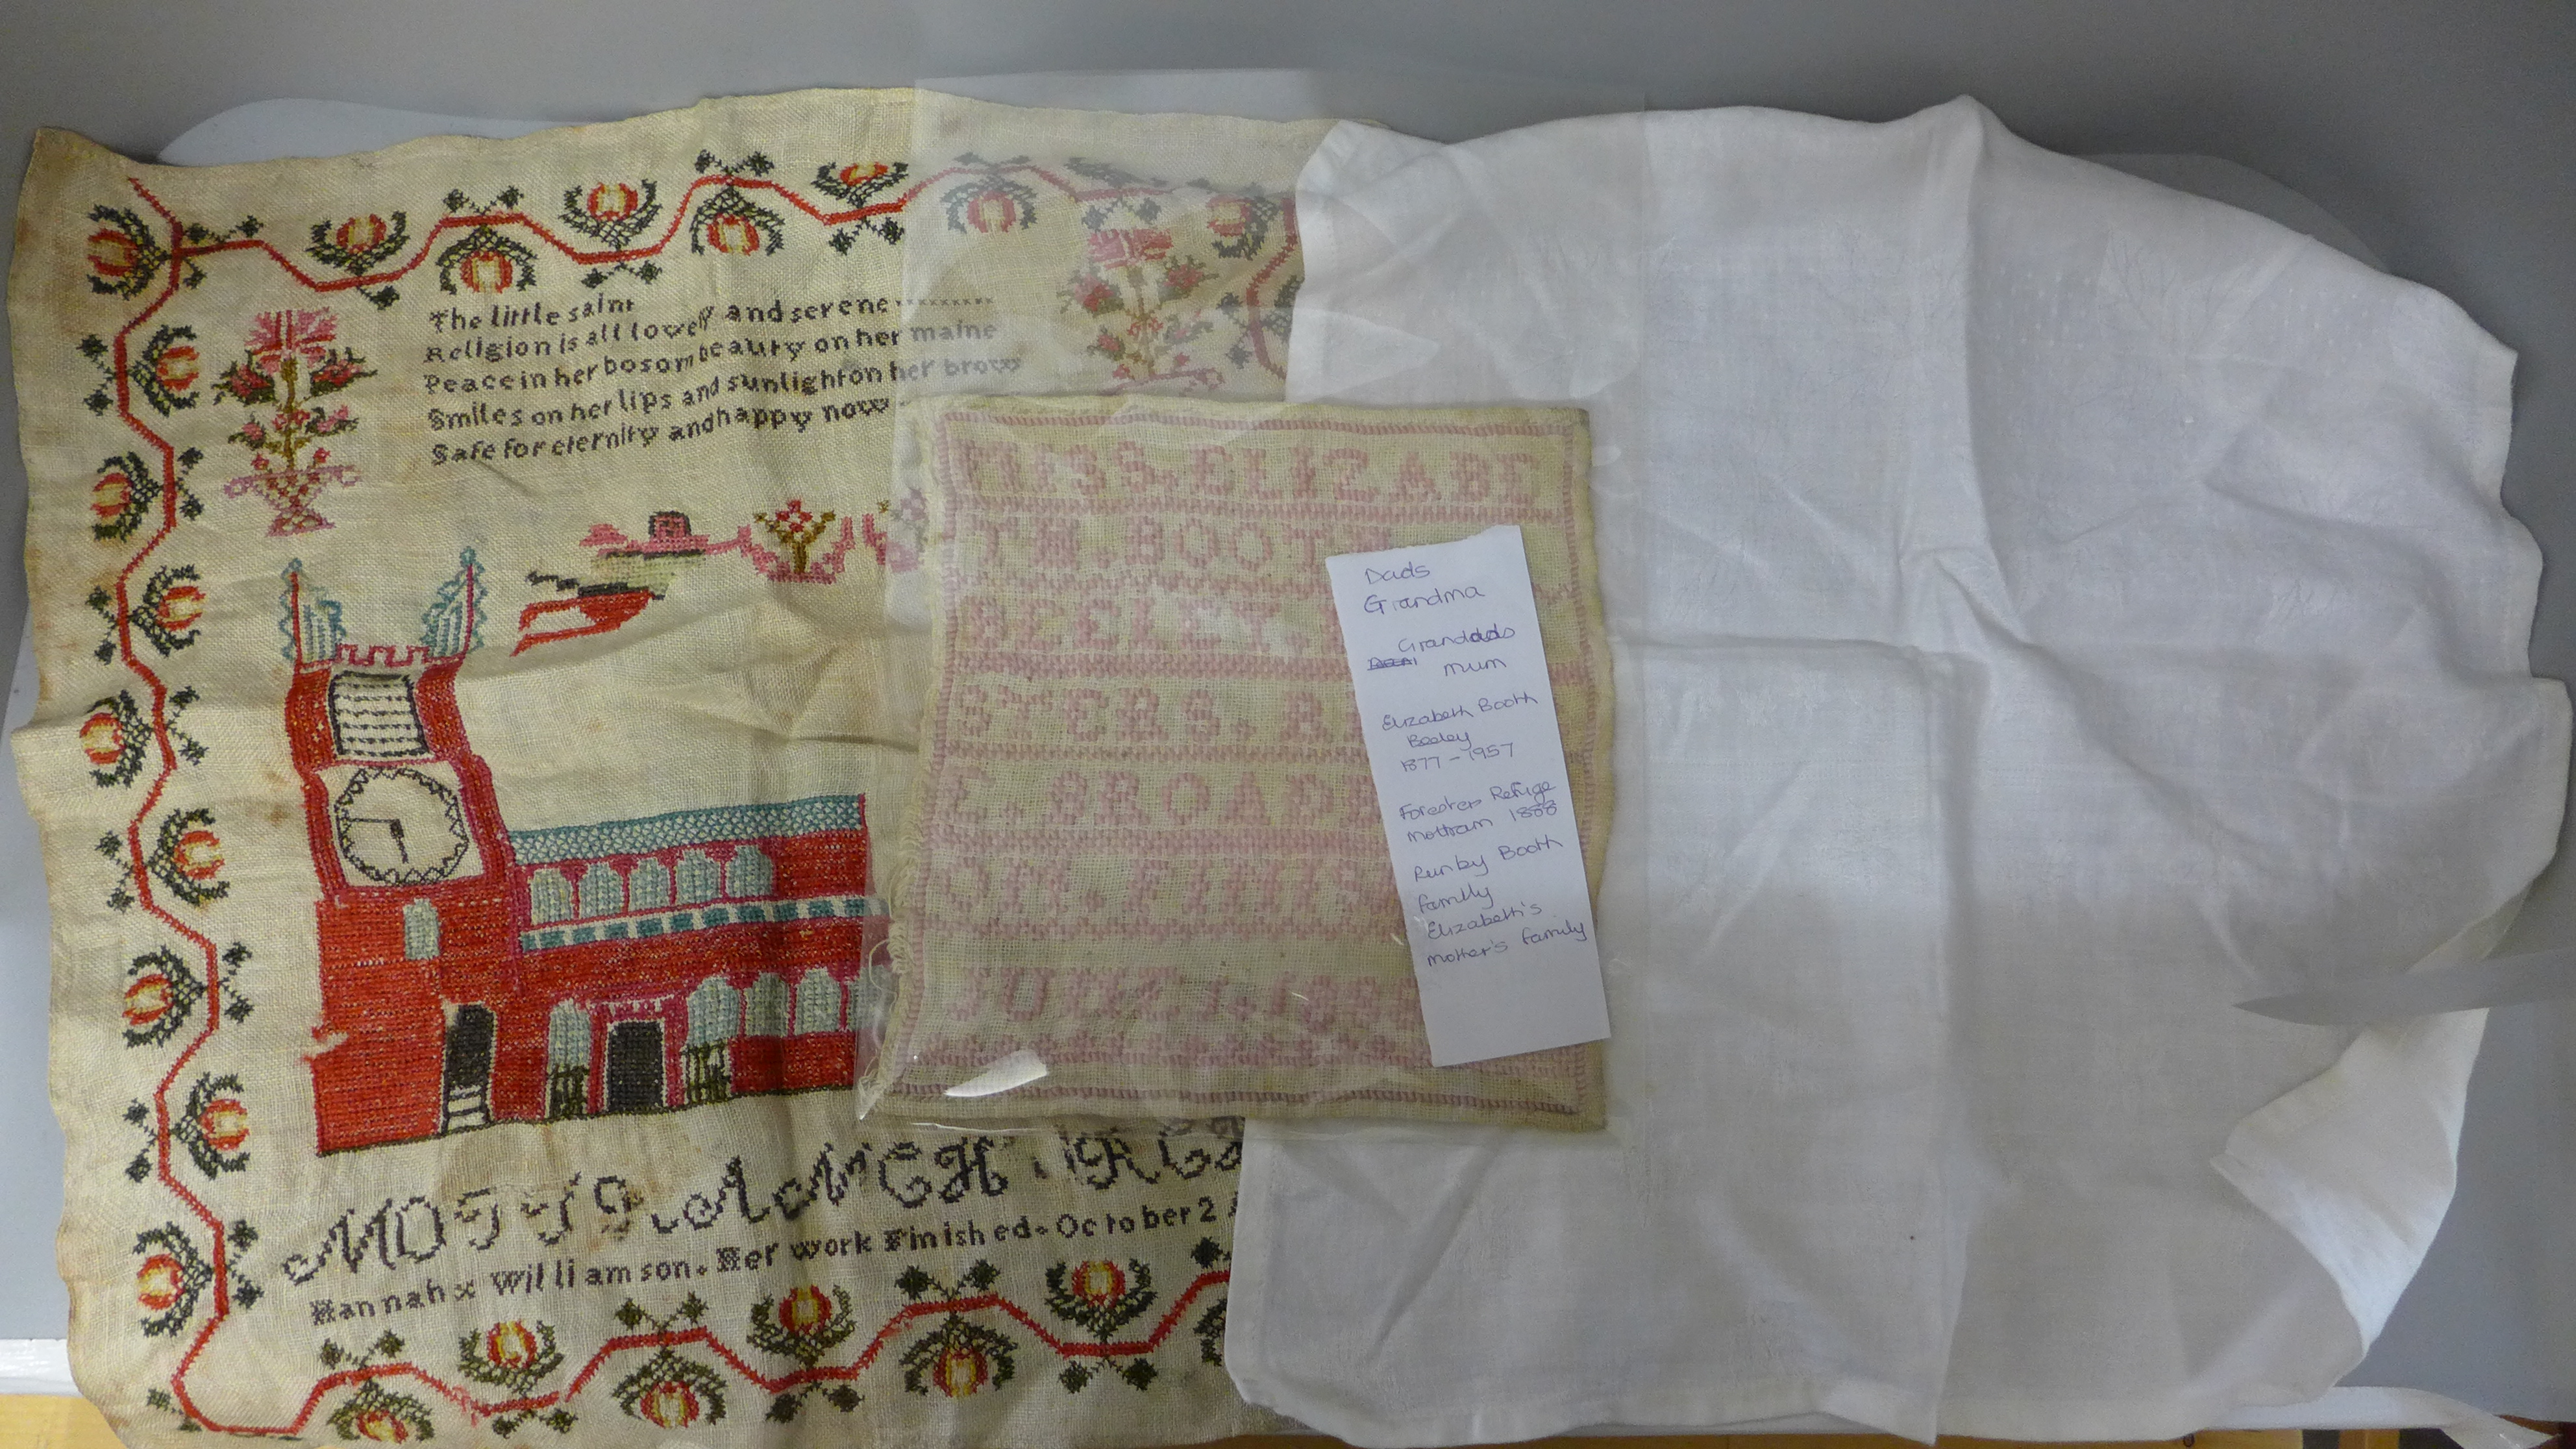 Two 19th Century samplers, one by Miss Elizabeth Booth Beeley (1877-1957) dated 1888 and the other